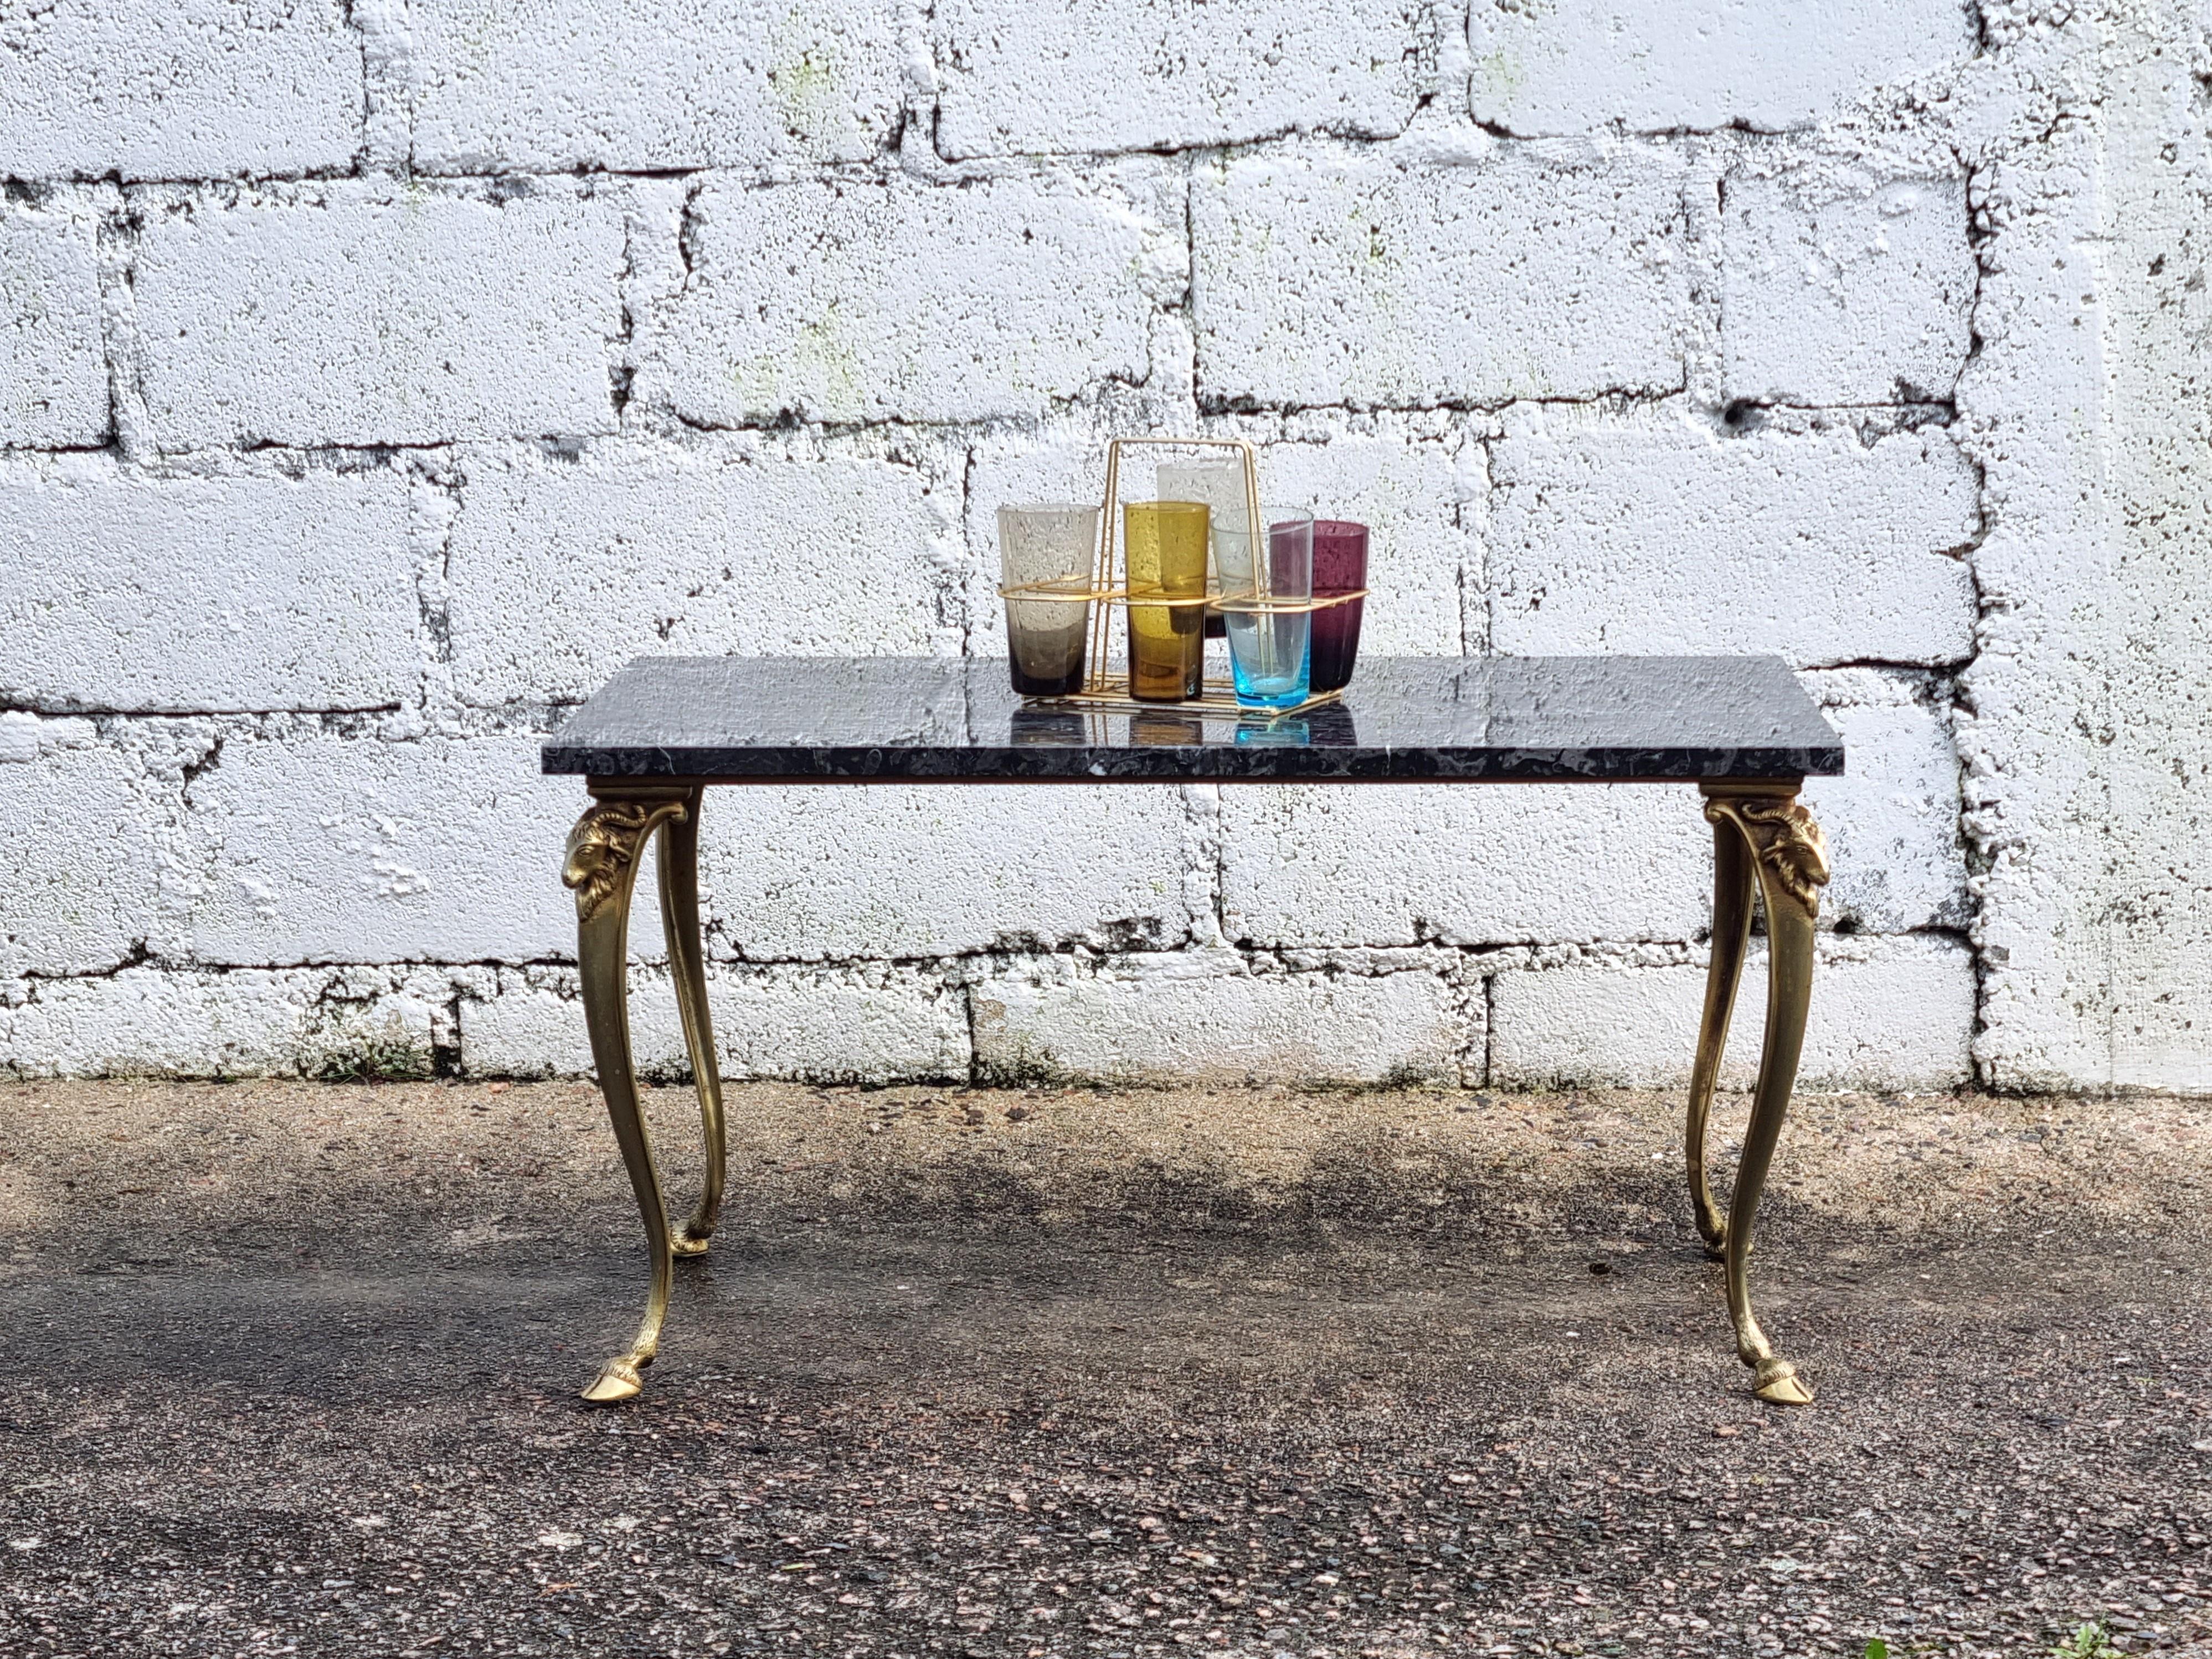 French Vintage black Marble and Bronze Coffee Table -Vintage Cocktail Table - Style Louis XVI from the 60s

Wonderful polished Marble Top with a beautiful play of colors in black, anthracite, gray and white
Noble golden Bronze-Steel Frame - very